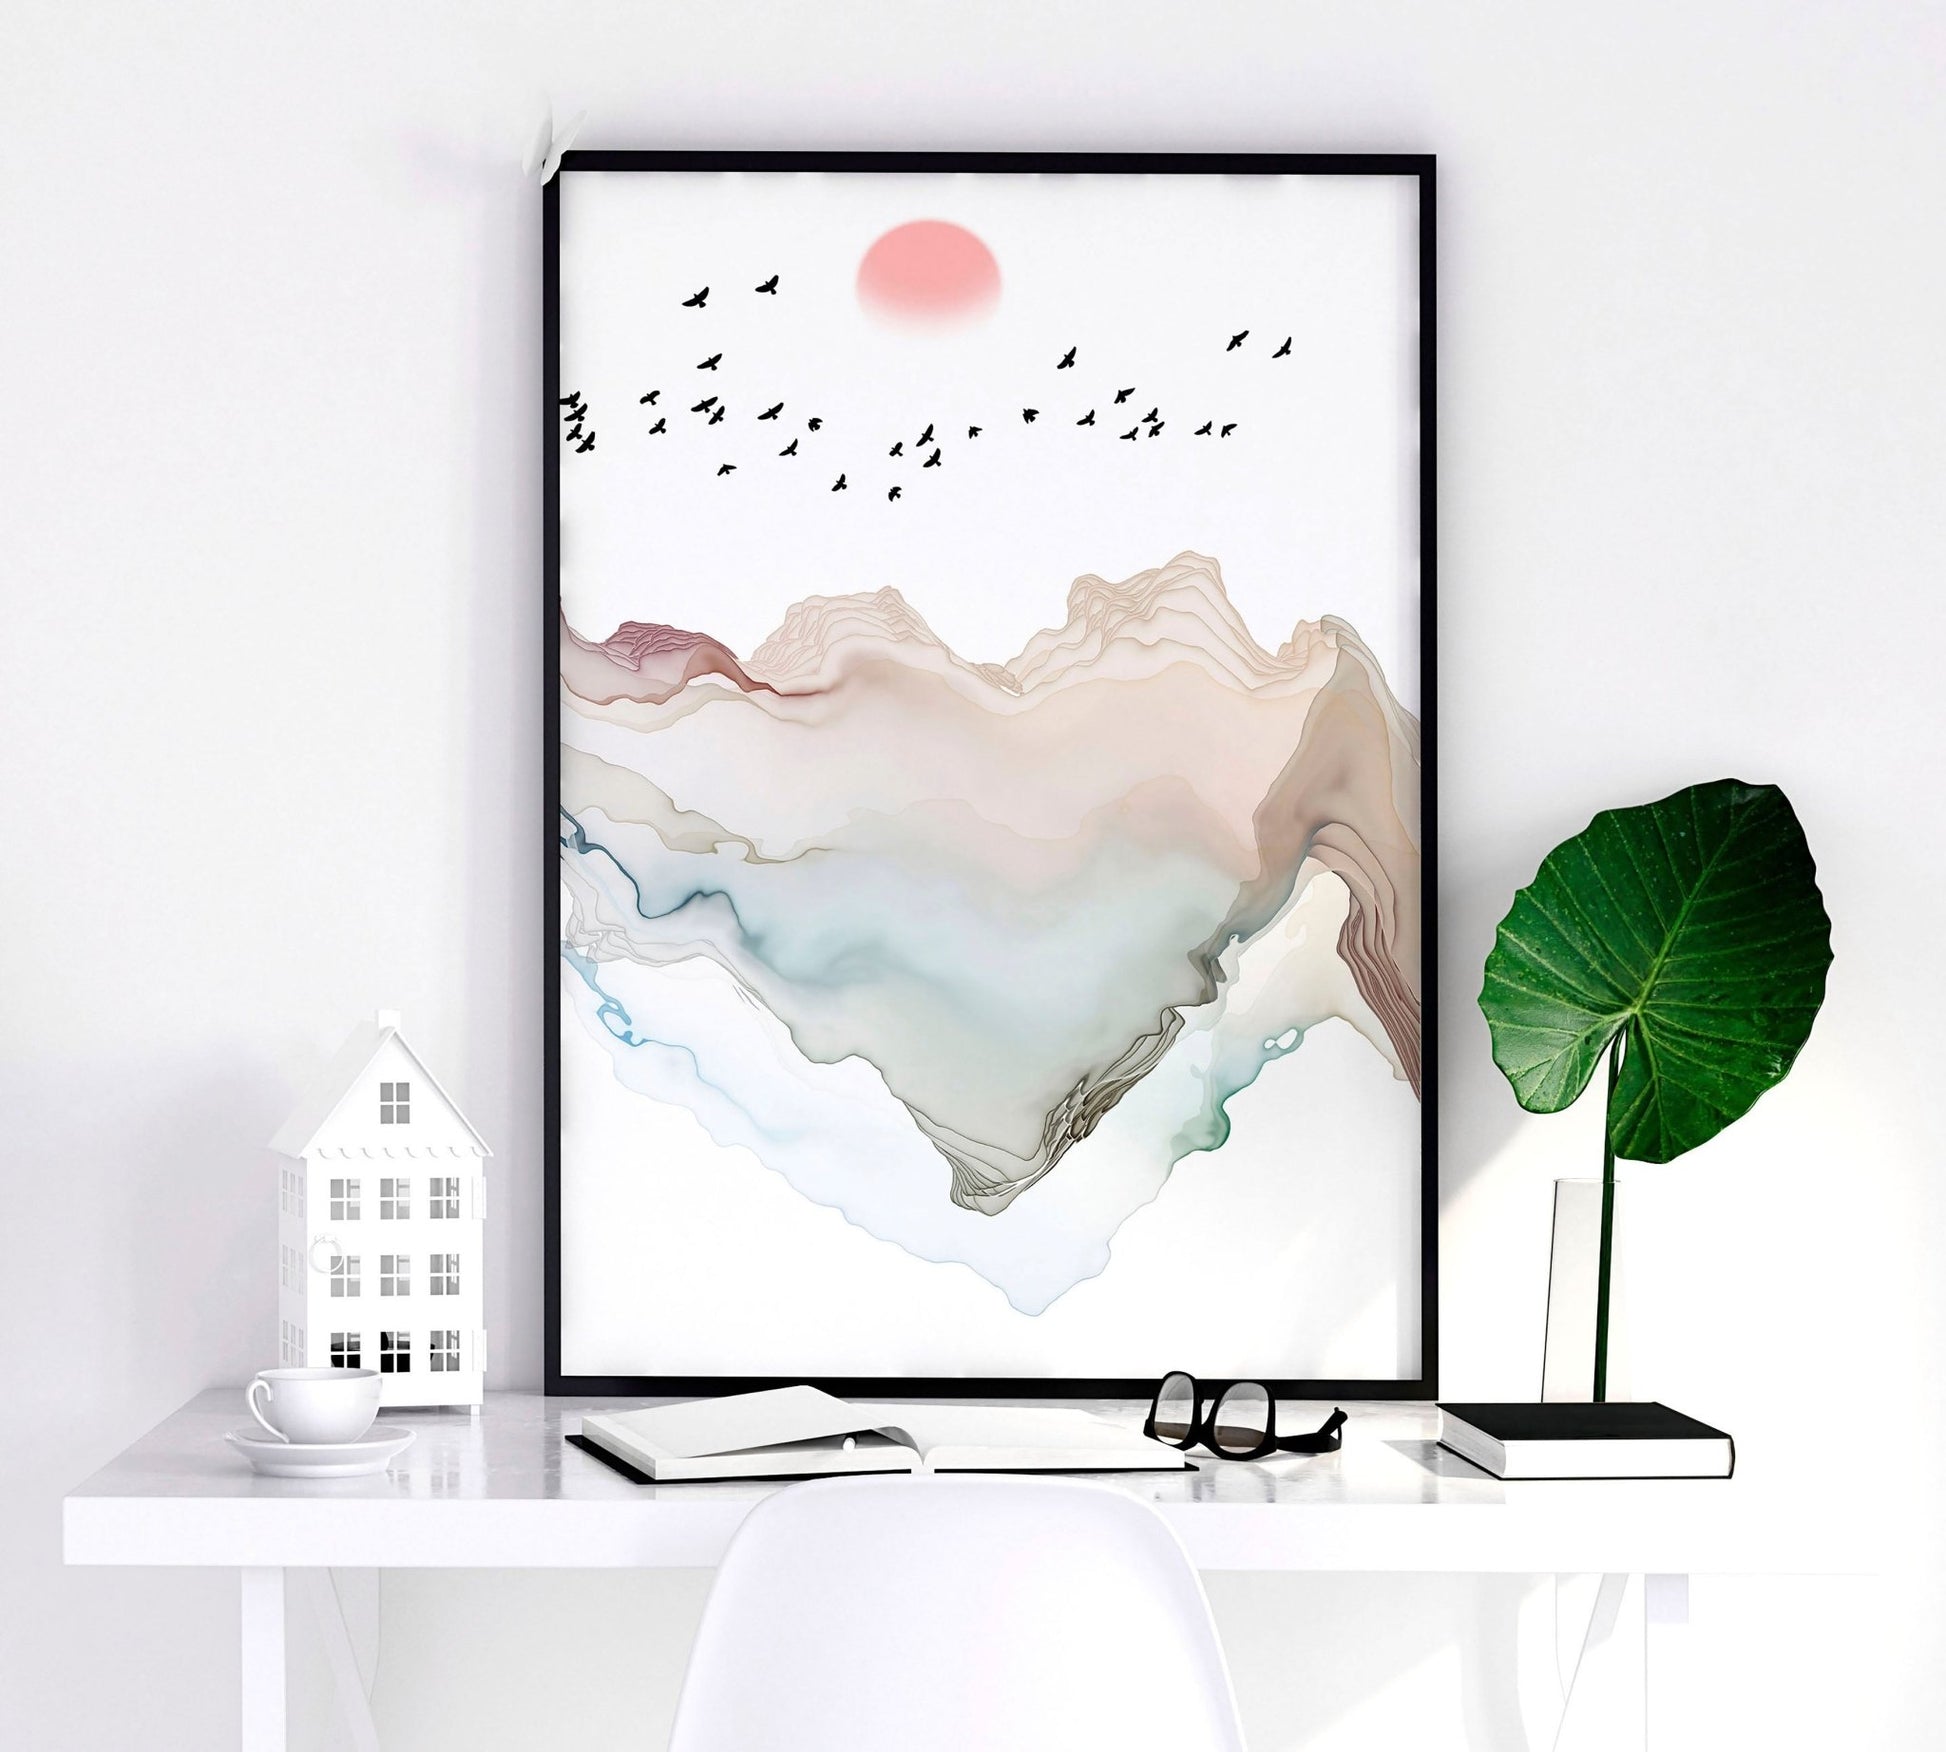 Japanese bedroom decor | set of 3 wall art prints - About Wall Art